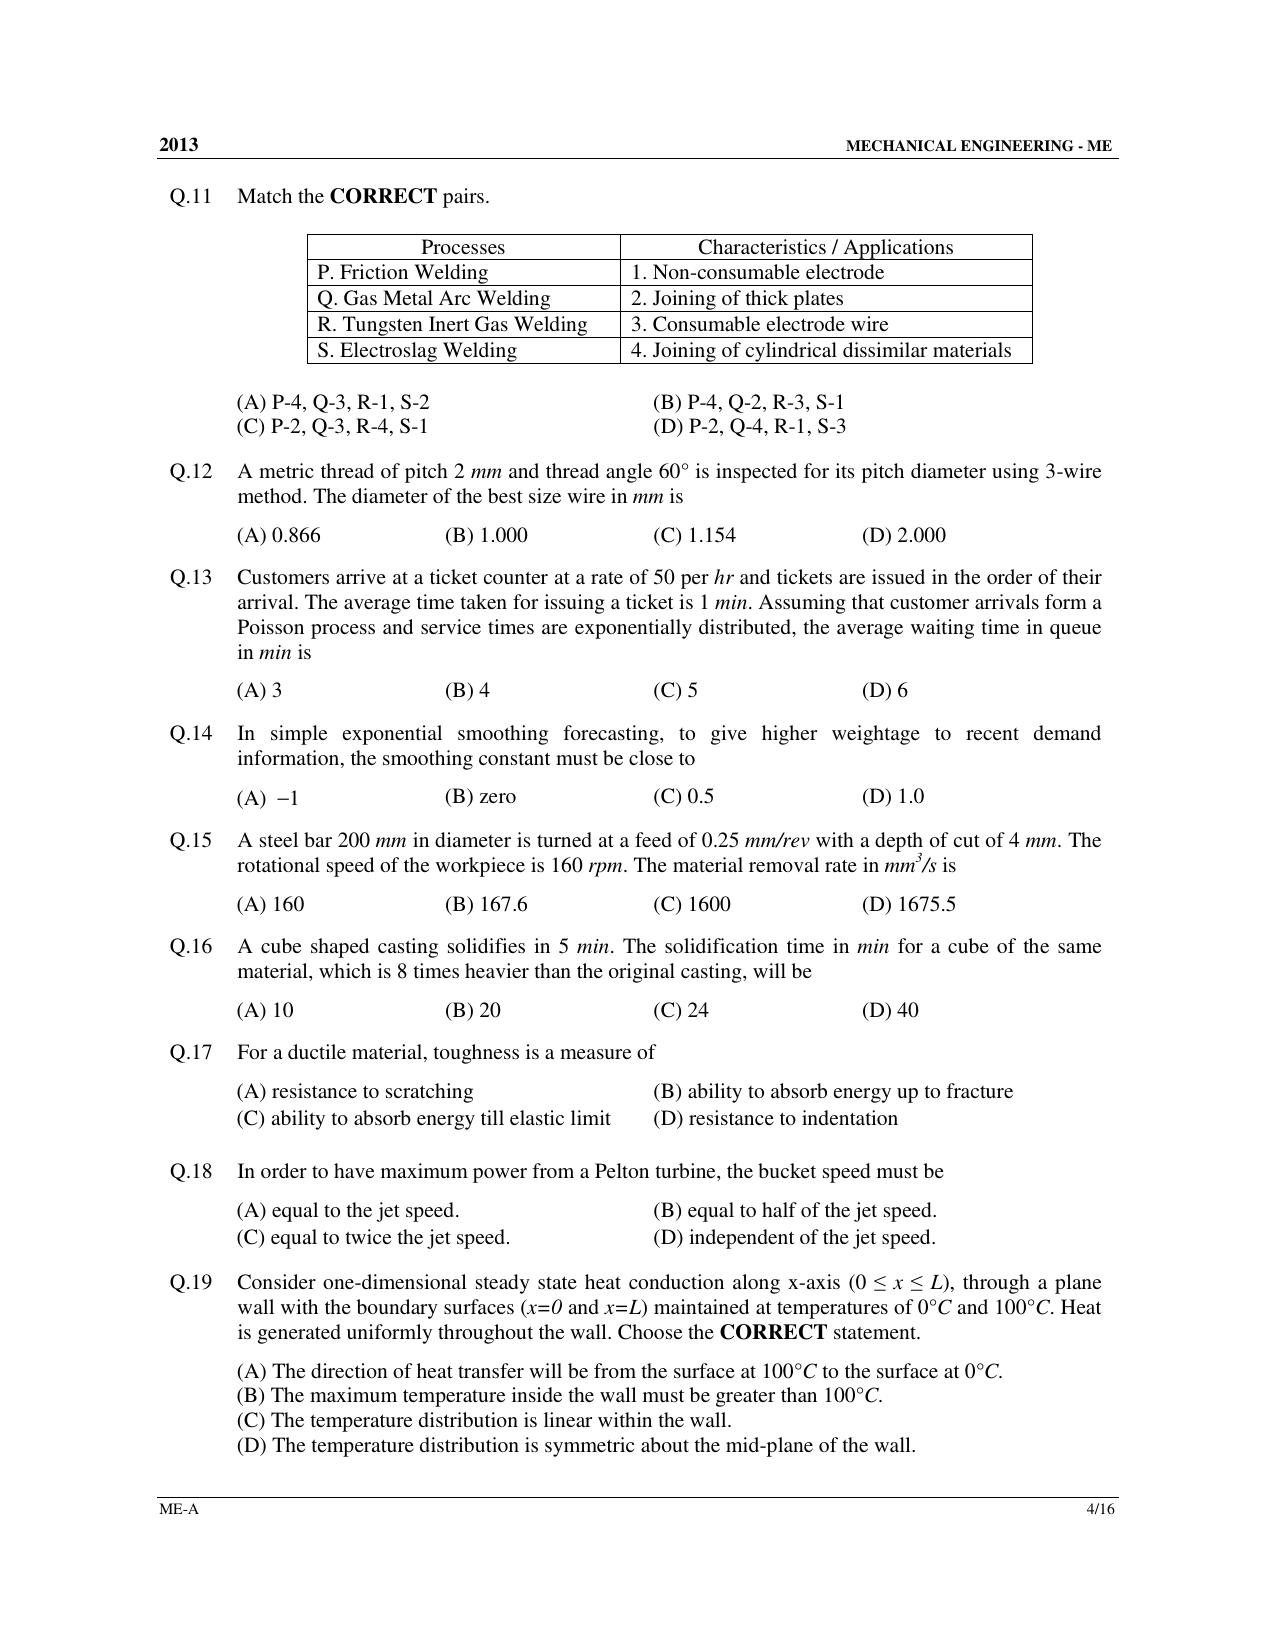 GATE 2013 Mechanical Engineering (ME) Question Paper with Answer Key - Page 5